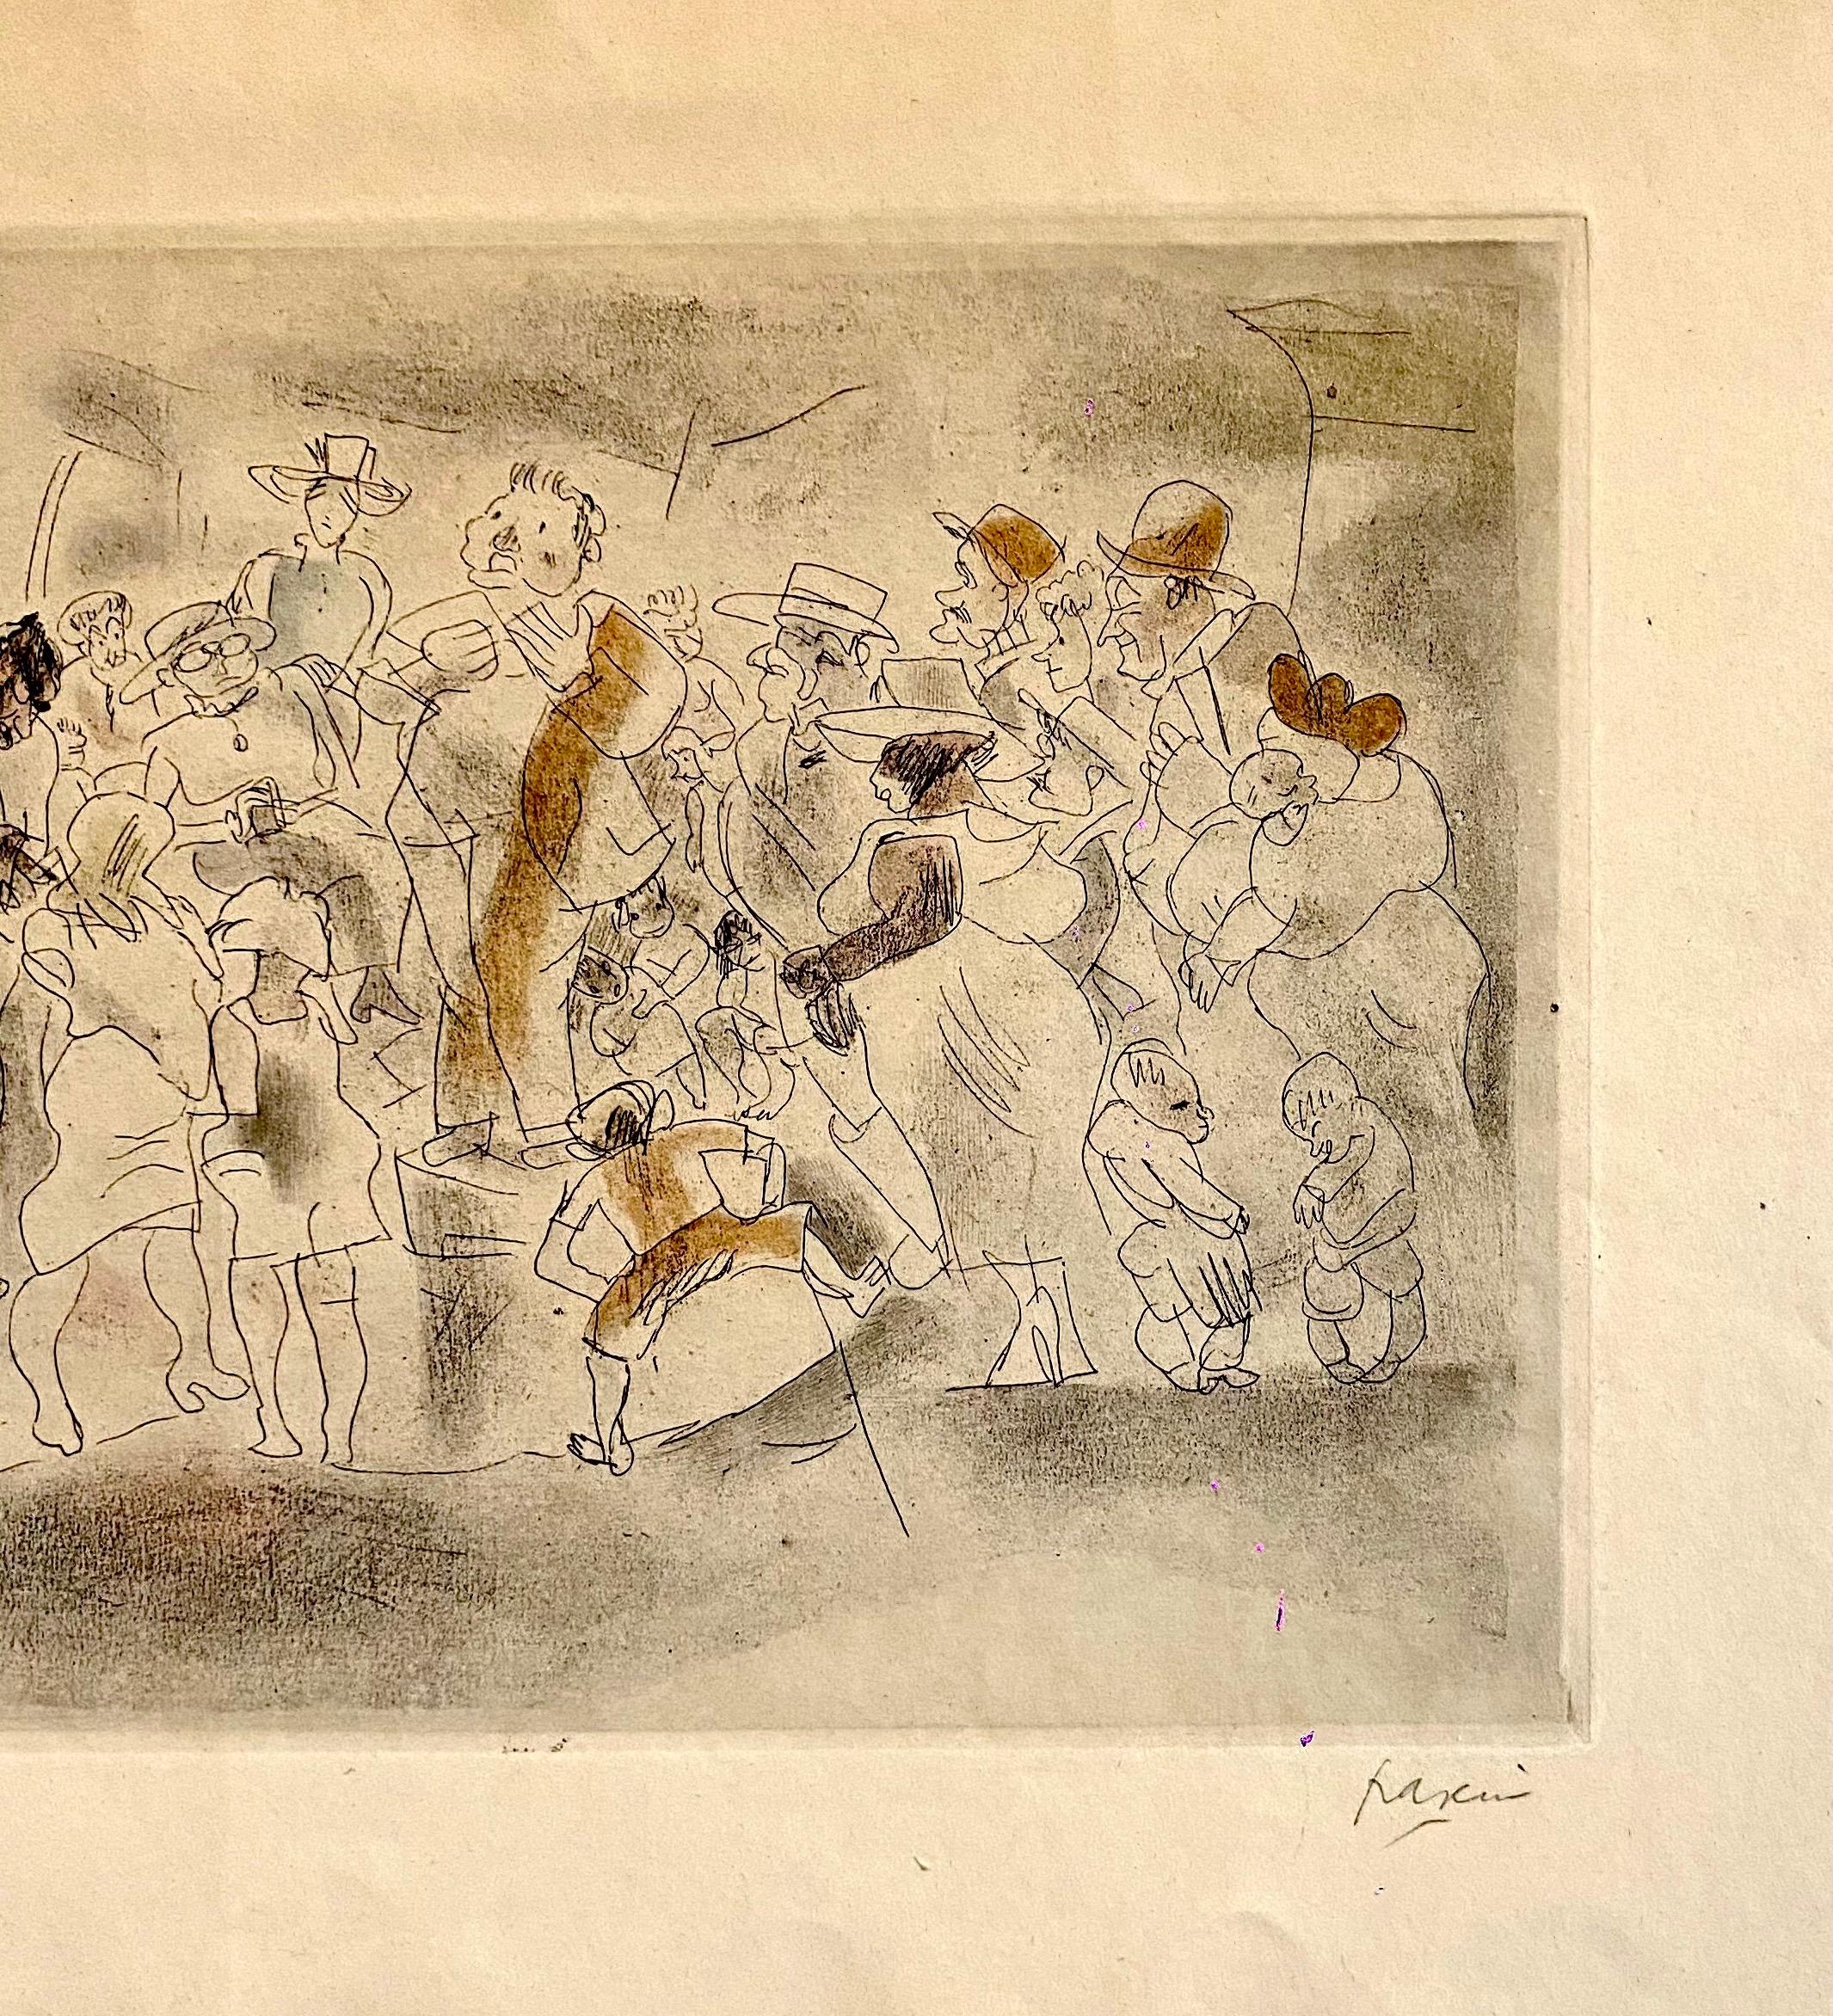 
Genre: German Expressionist
Subject: Figures
Medium: etching, watercolor paint
Surface: Paper
This is hand signed lower right.. there does not seem to be an edition size although there is a handwritten number lower left
sheet measures 12.5 x 19.88.